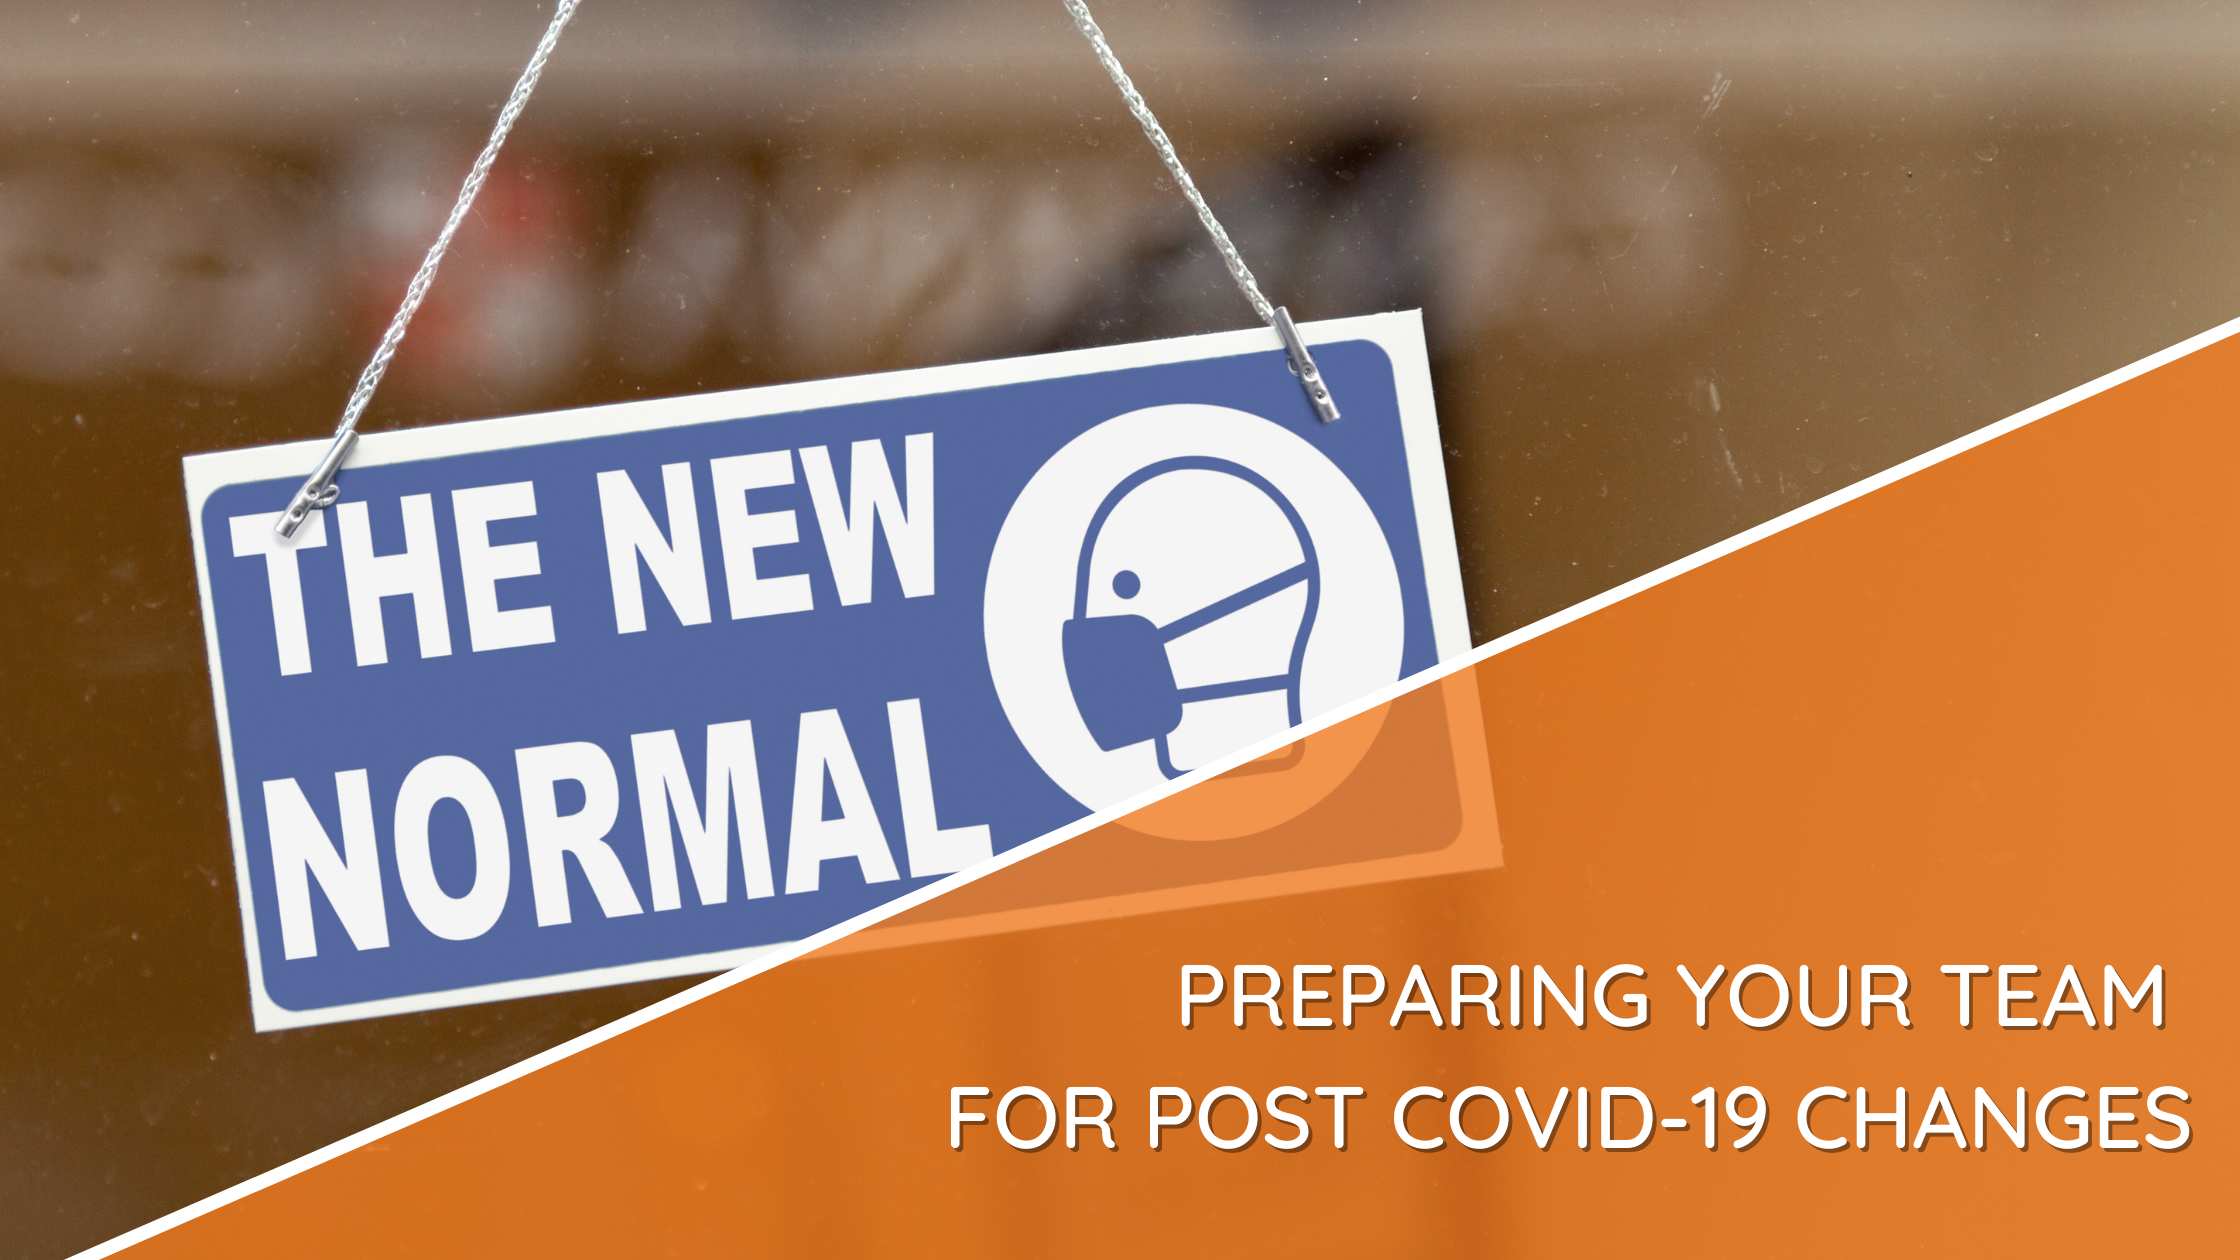 Preparing Your Team For Post Covid-19 Changes